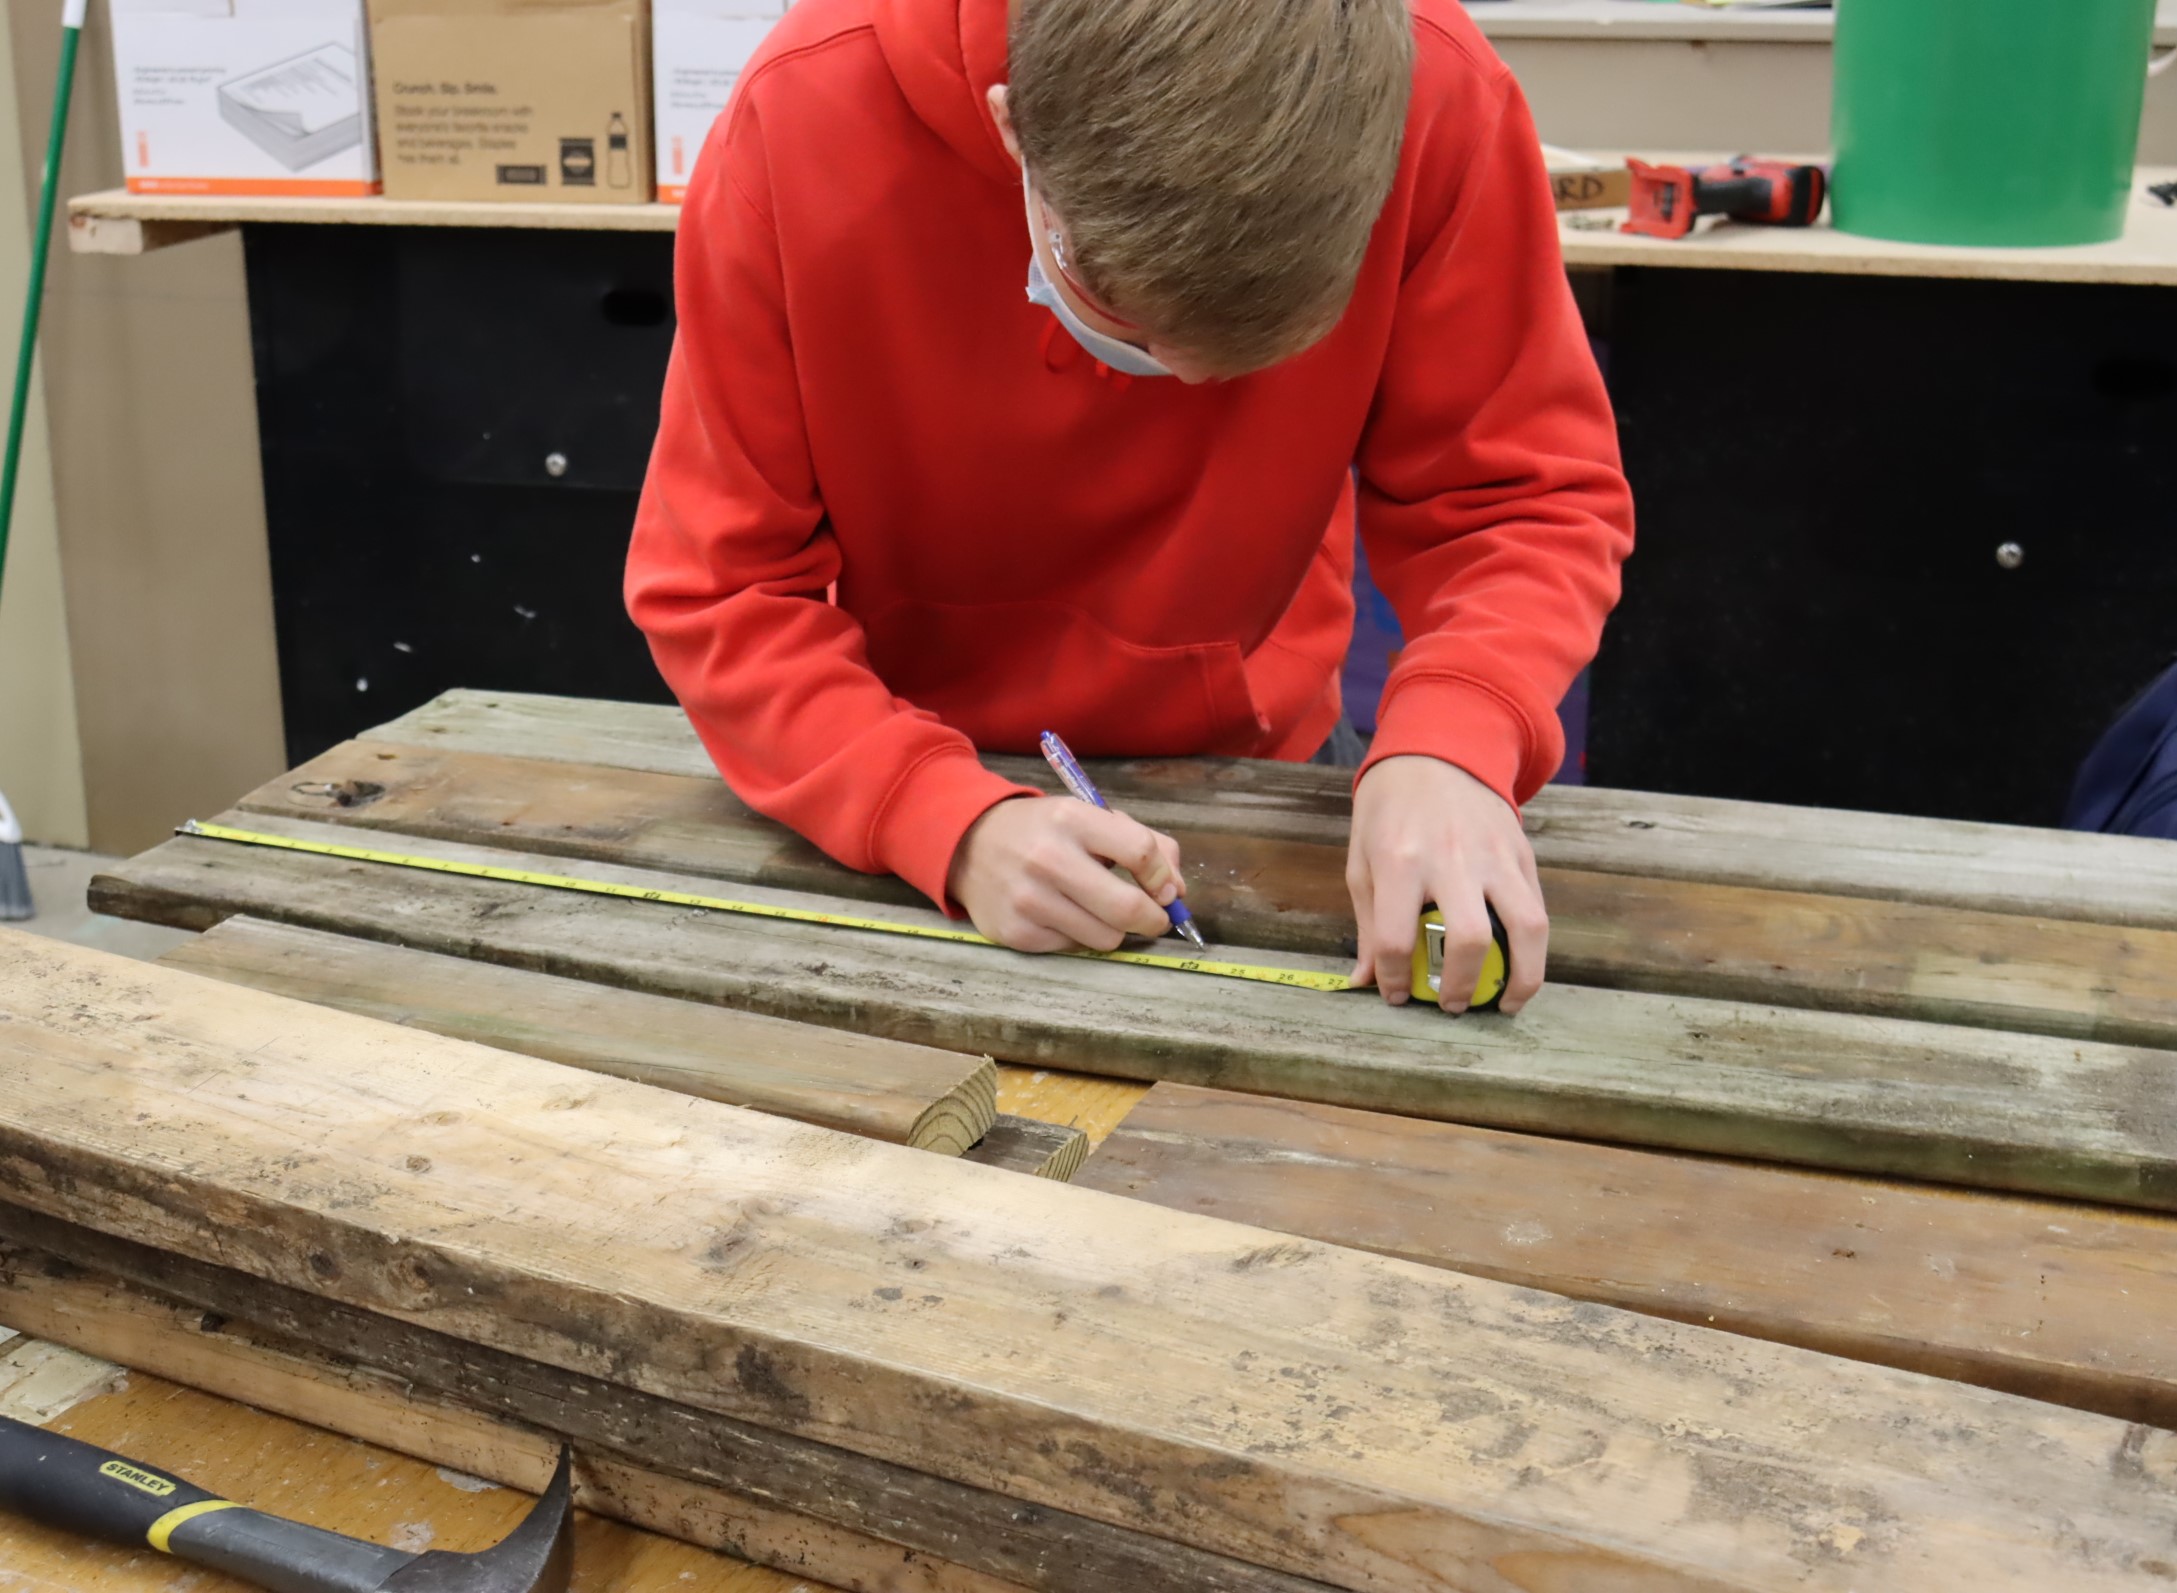 Teacher S Chime In On Teaching Woodworking During A Pandemic Woodwork Career Alliance Of North America